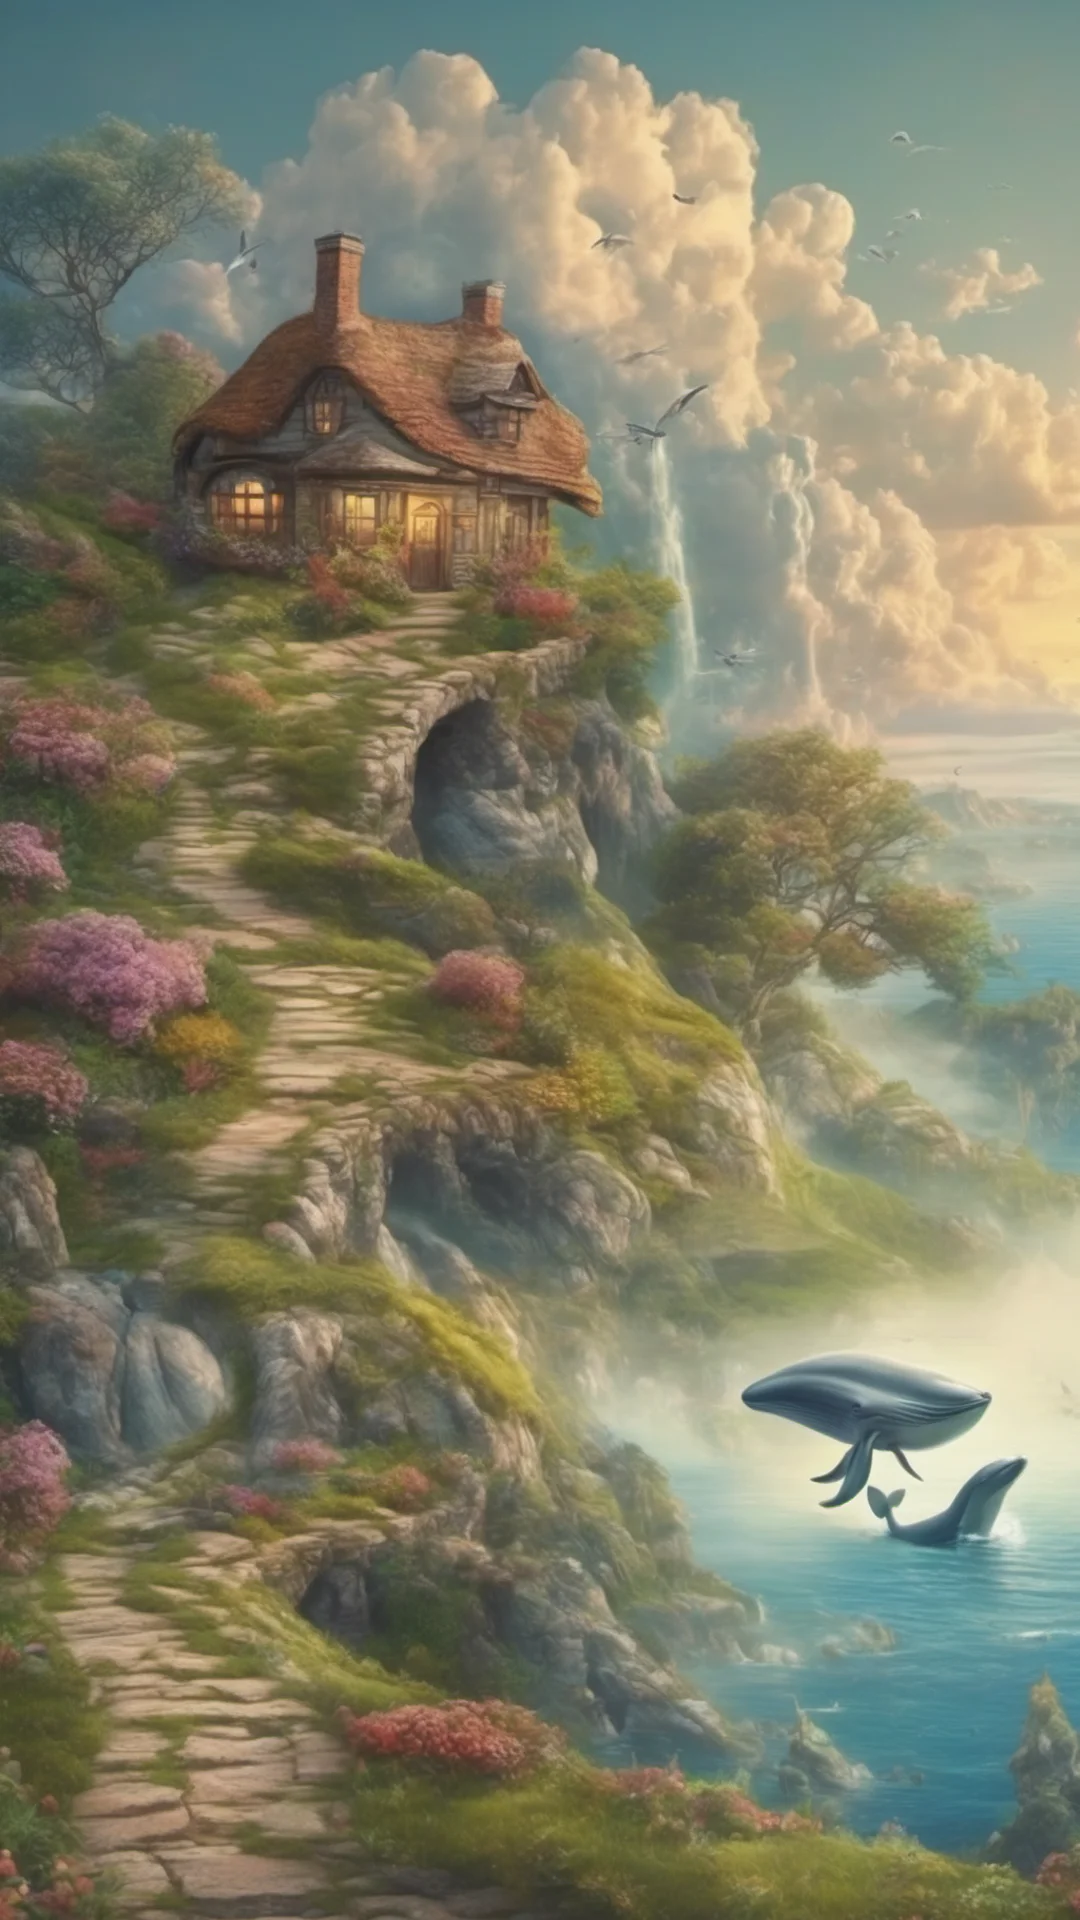 aibeautiful fantasy landscape flying whale cottage on path to sweeping views amazing awesome portrait 2 tall